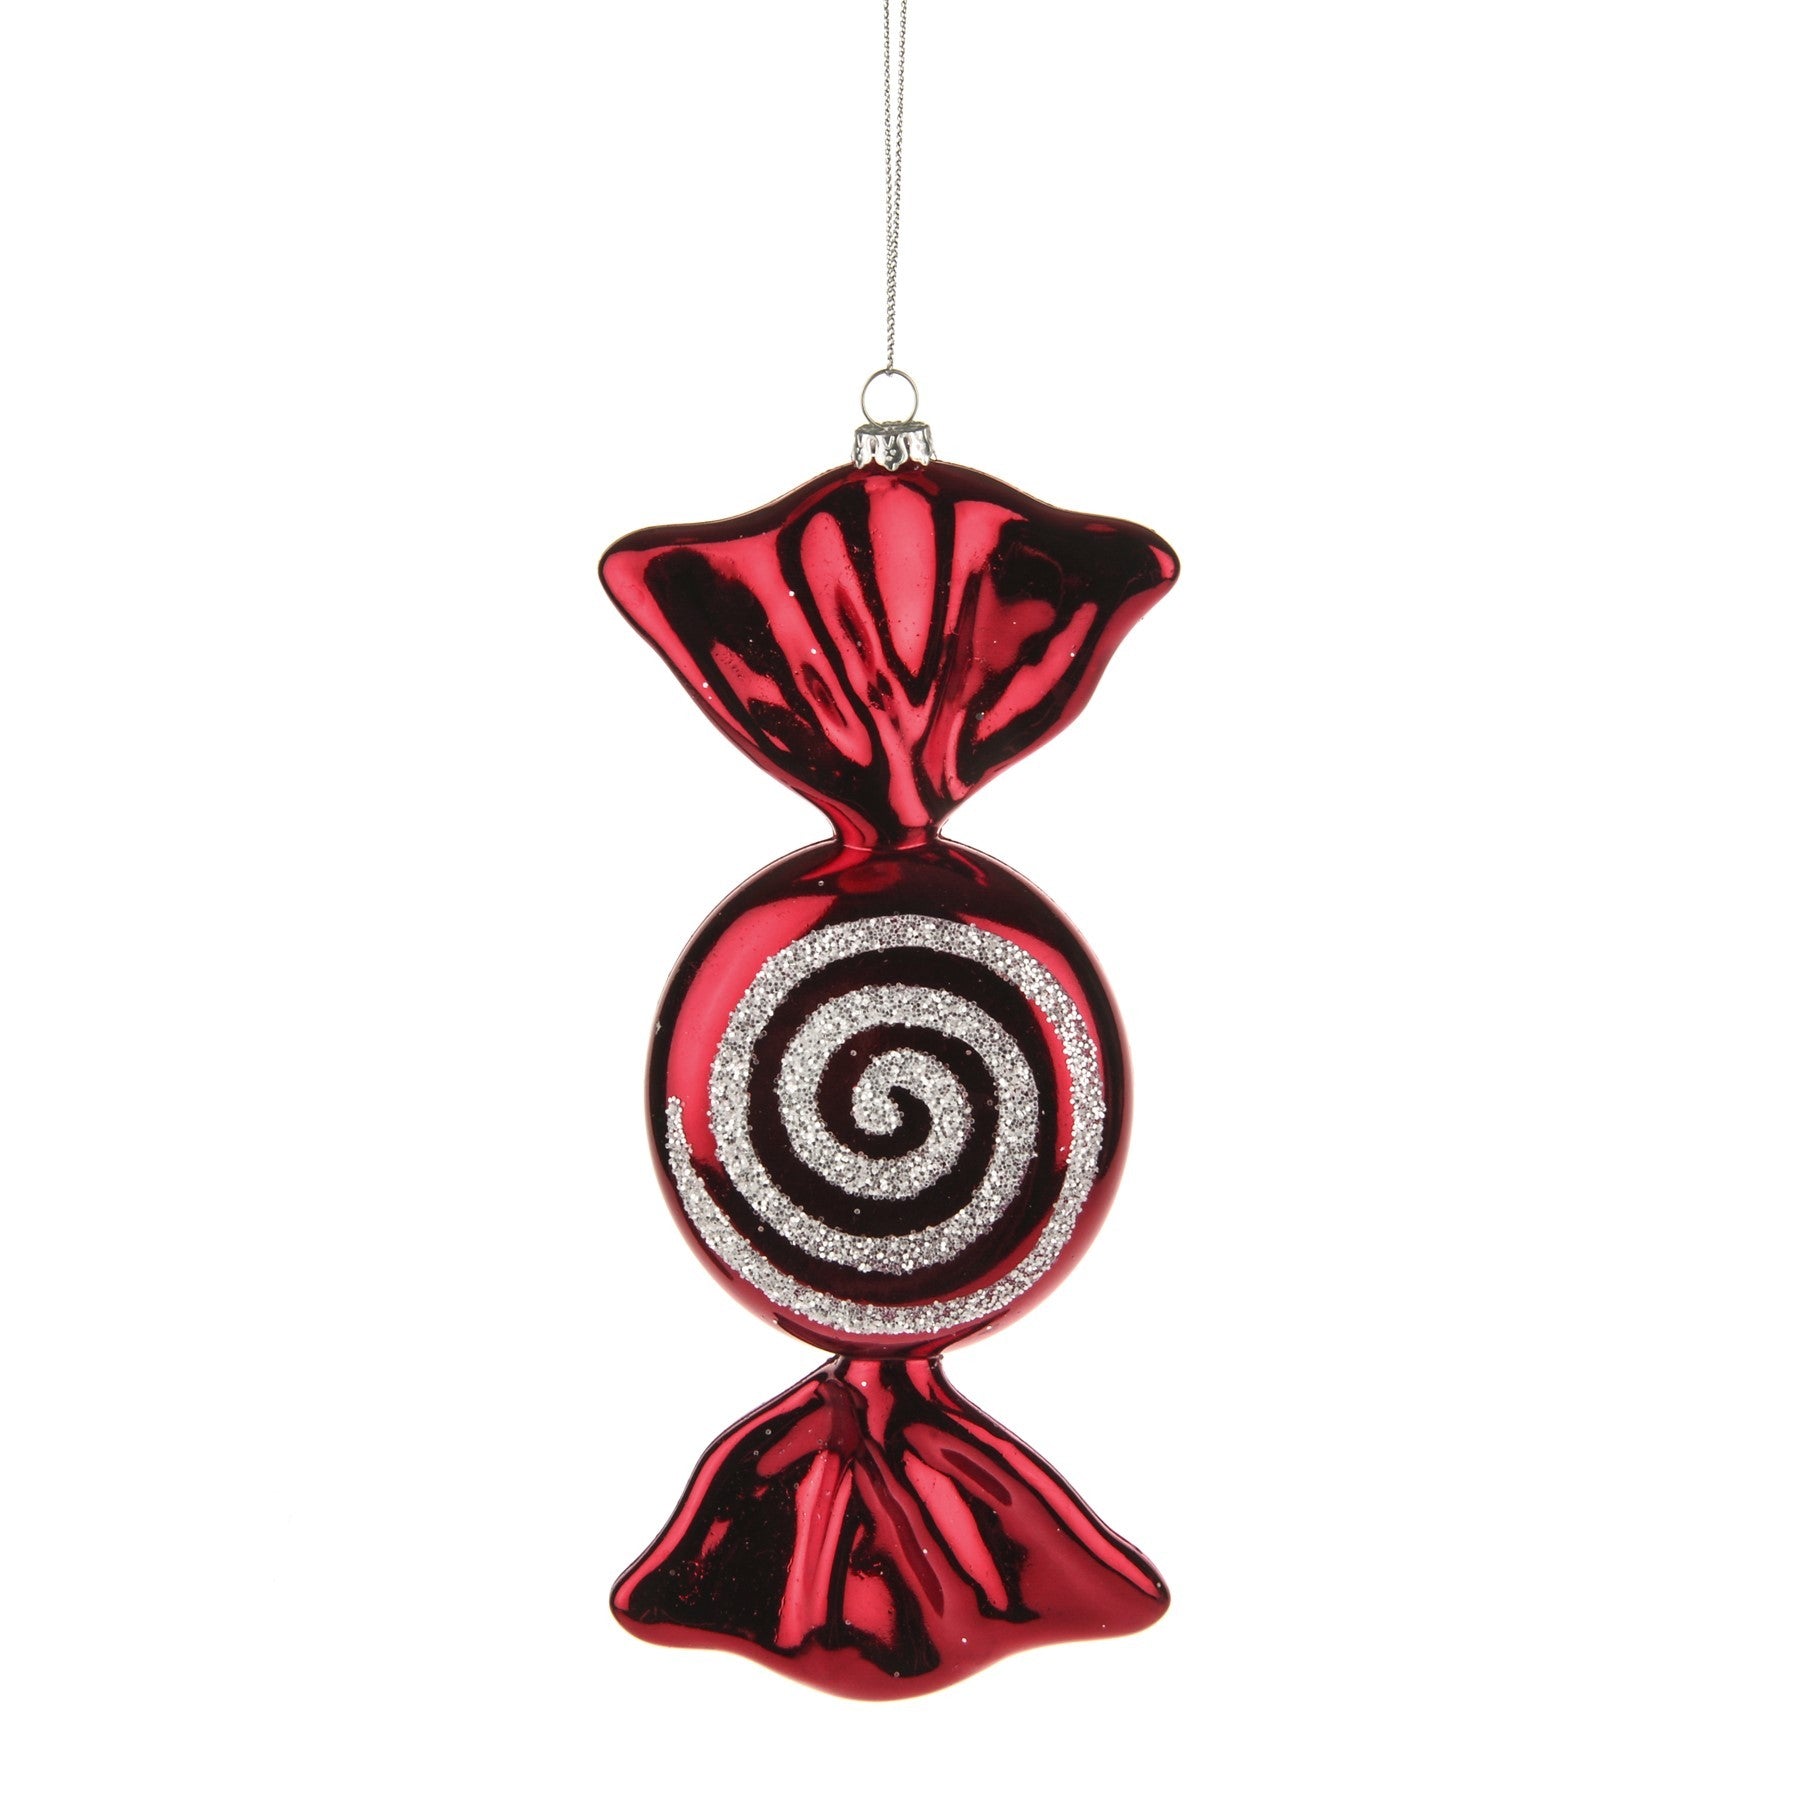 View Candy Swirl Ornament 12cm information